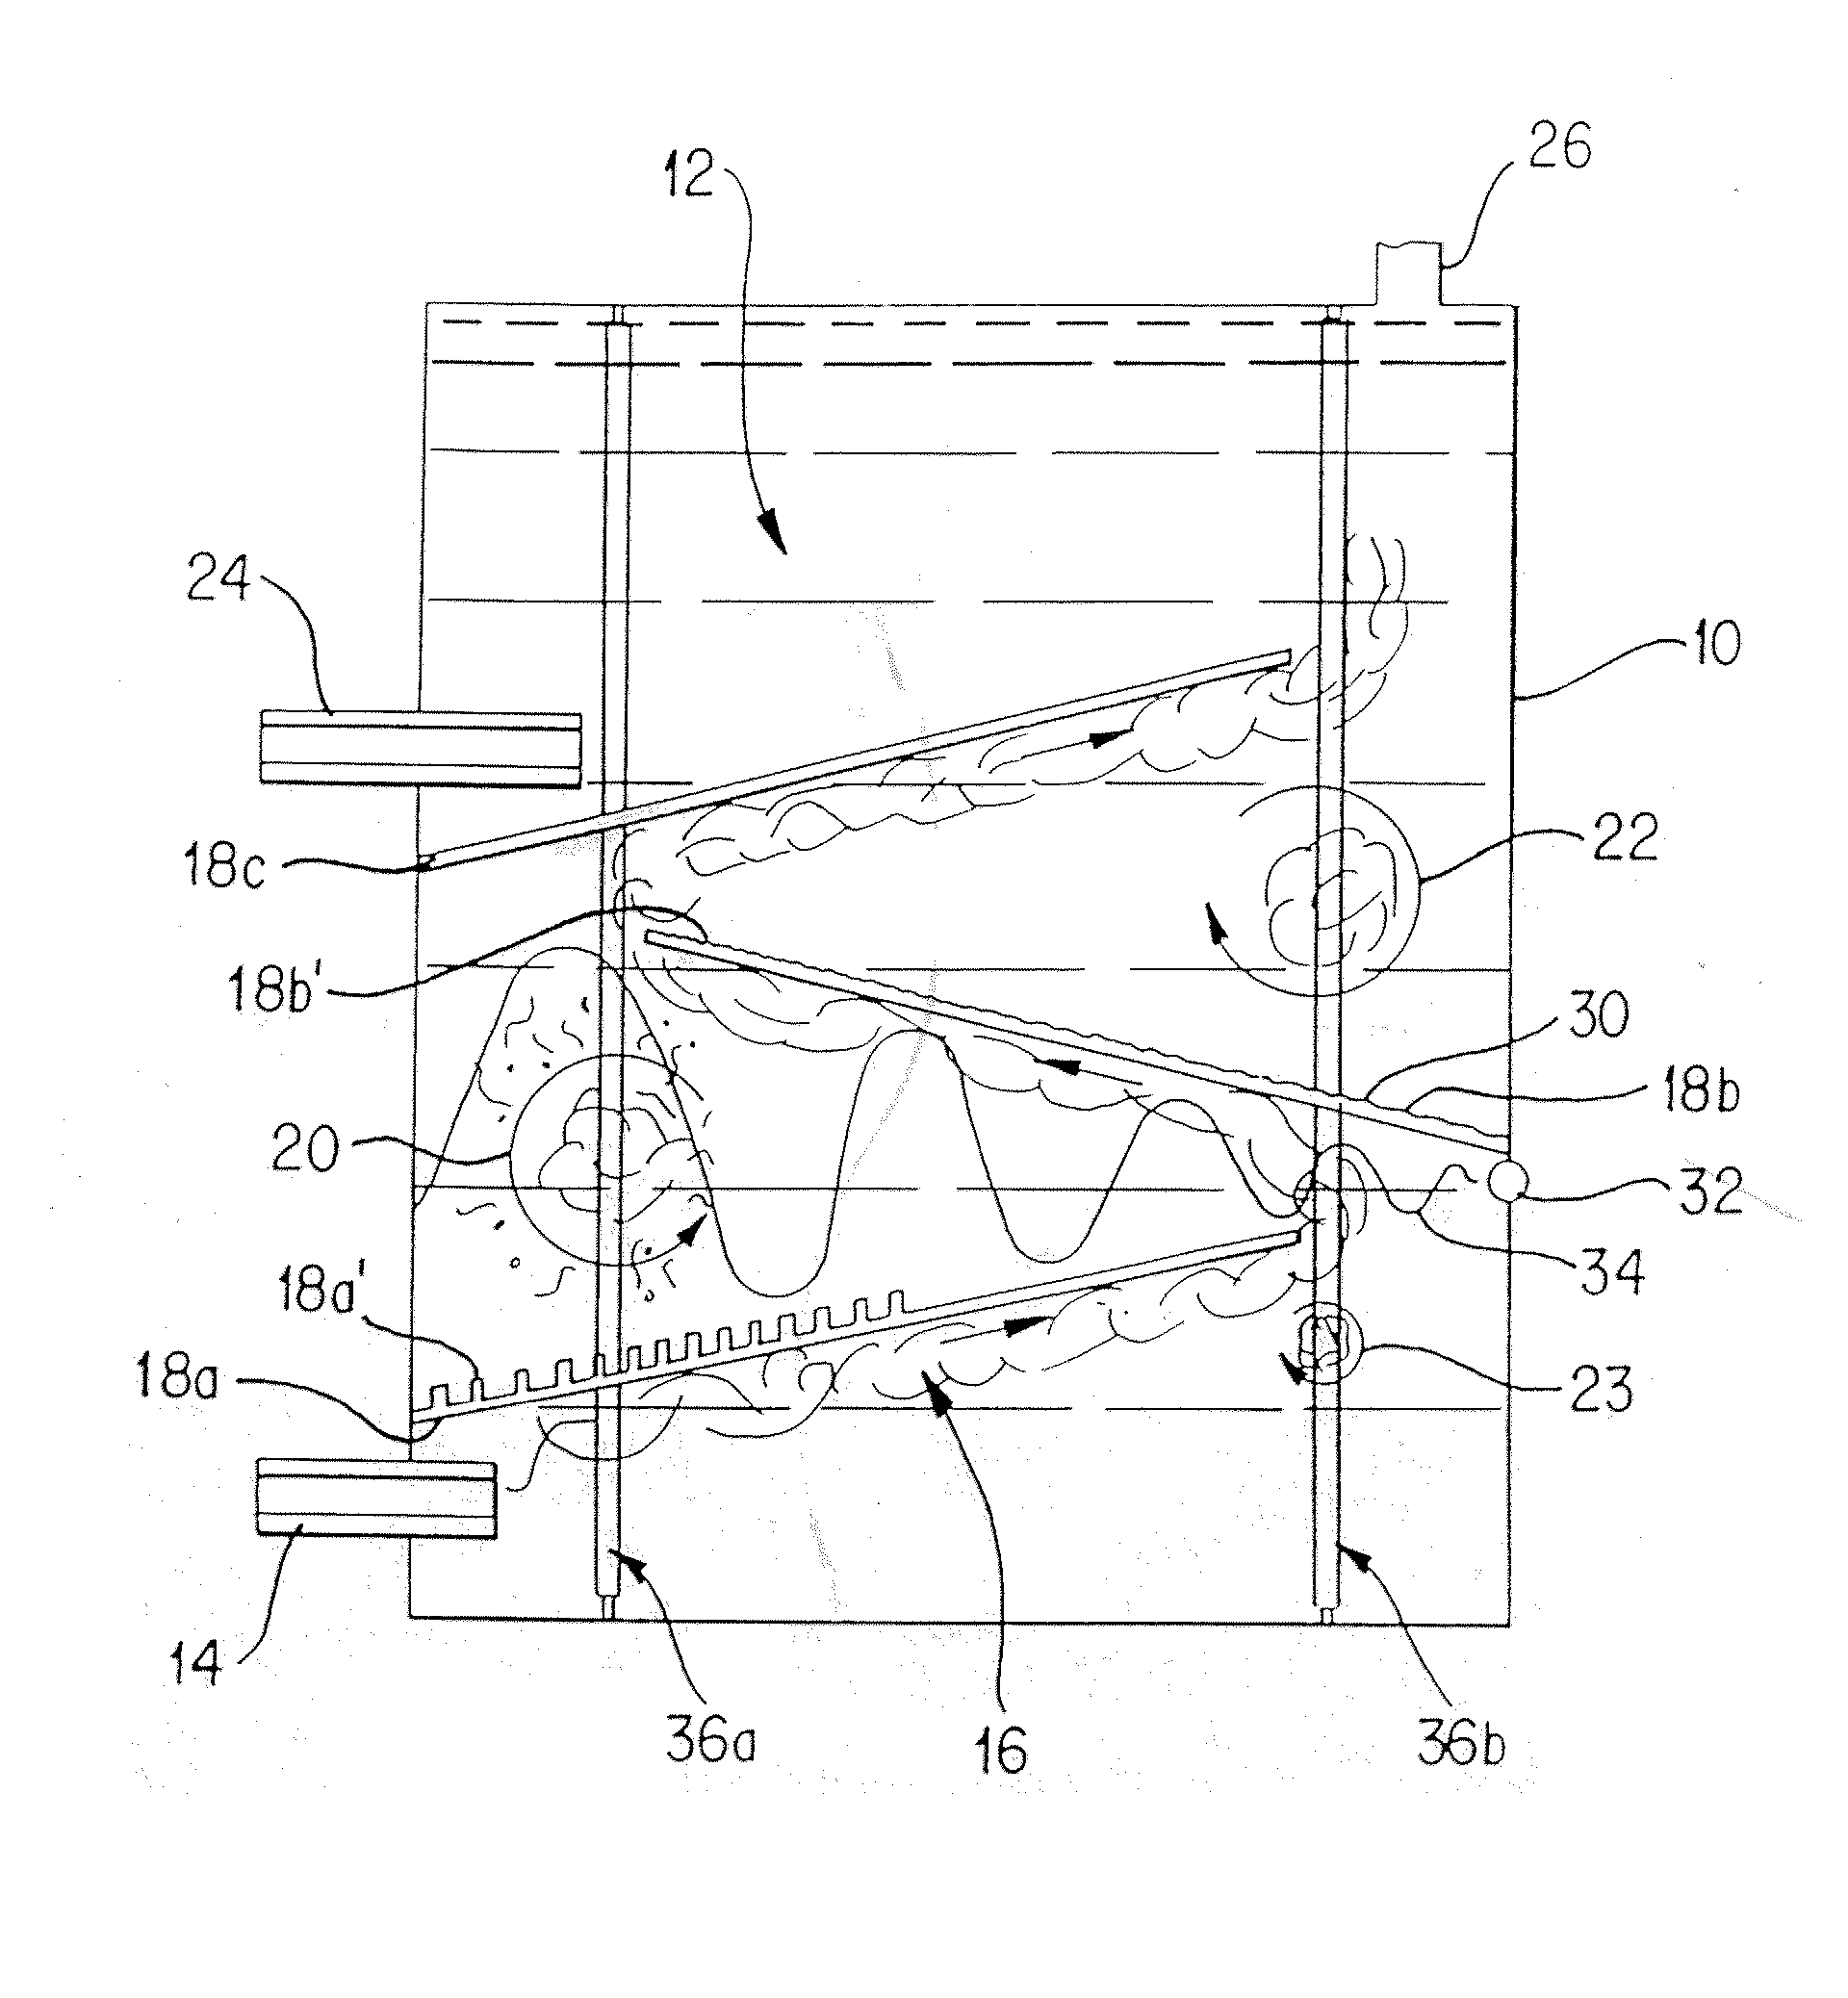 Fluid contact chamber